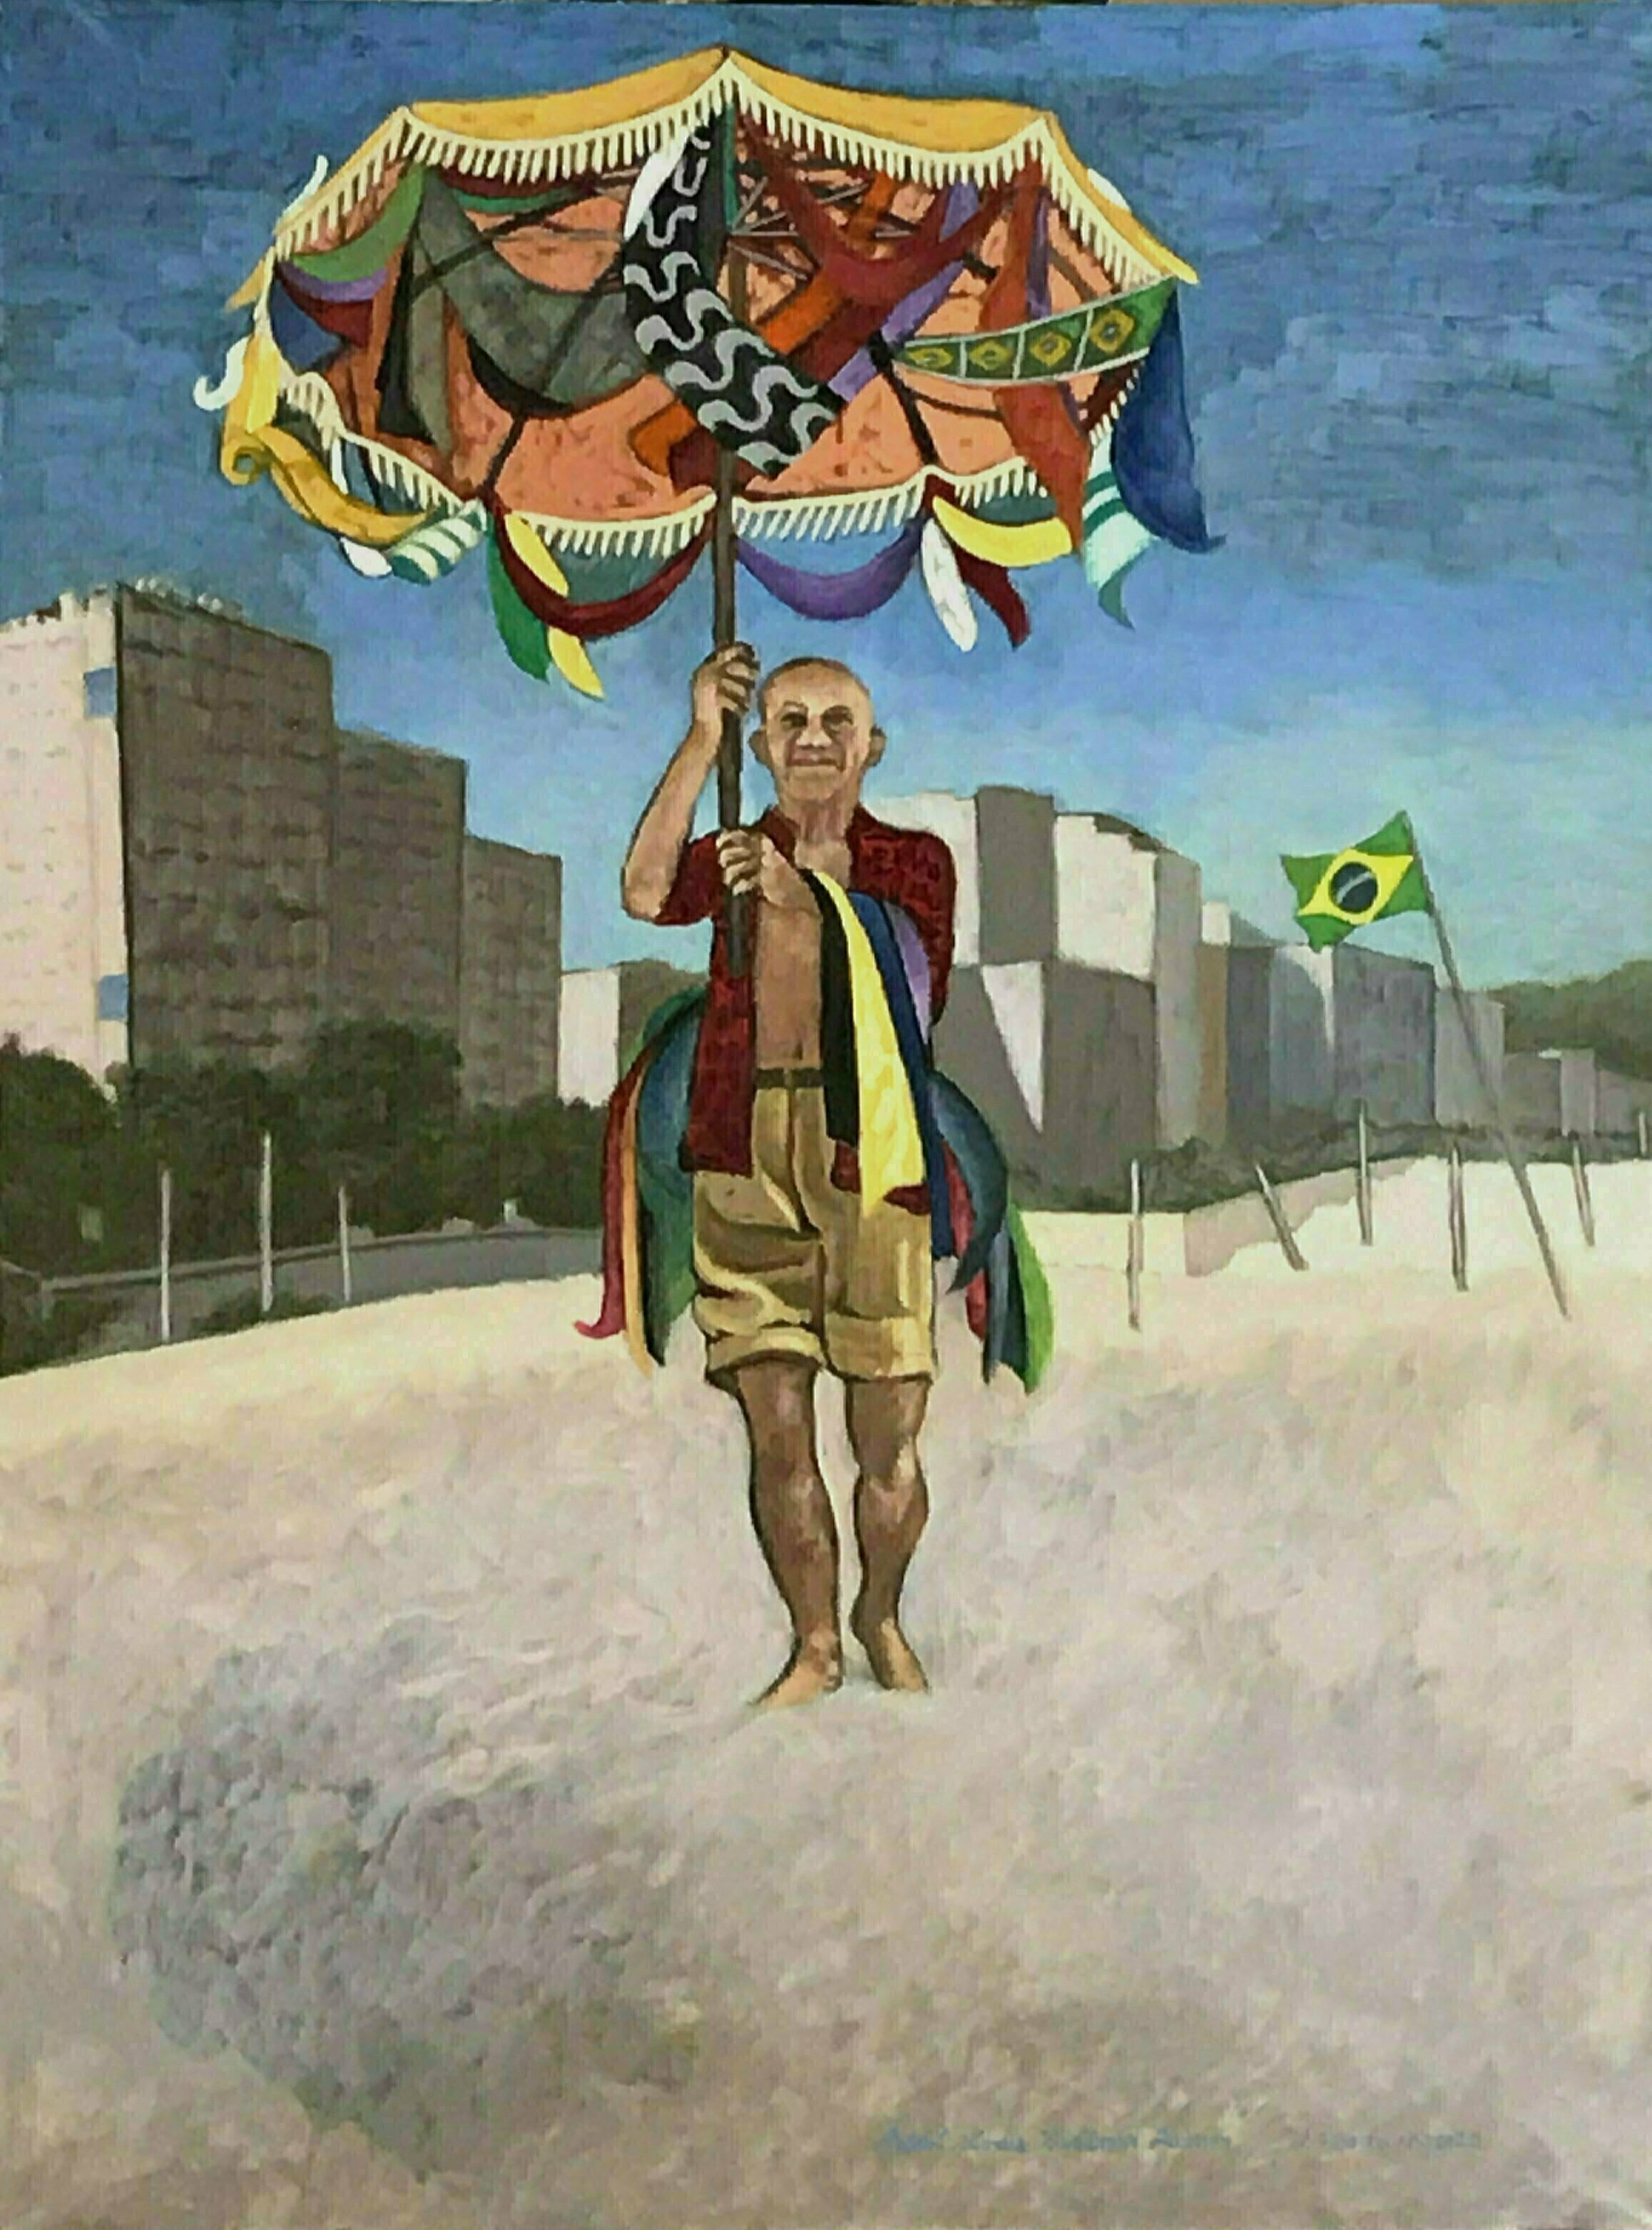 Lou Posner, 'Picasso On Copacabana Beach', 2020, original Painting Oil, 30 x 40  x 1.5 inches. Artwork description: 1911 Picasso visits Copacabana Beach, Brazil, bringing a New Year s gift of color and delight which sparks joy. ...